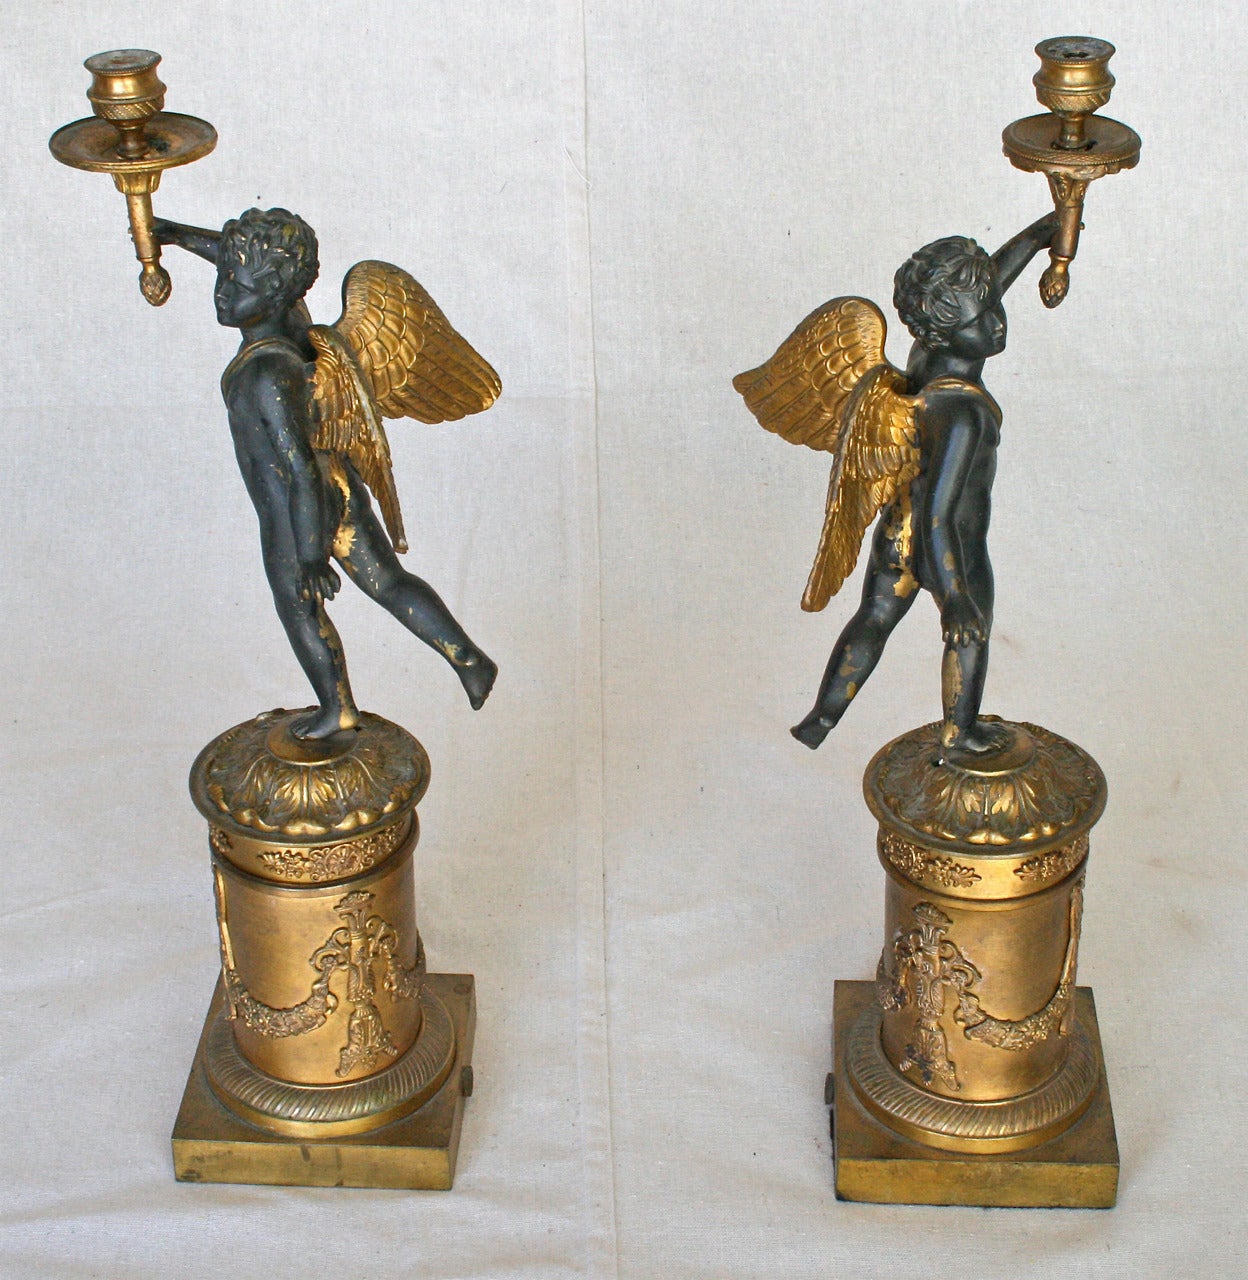 Empire Pair of 19th Century French Candlesticks